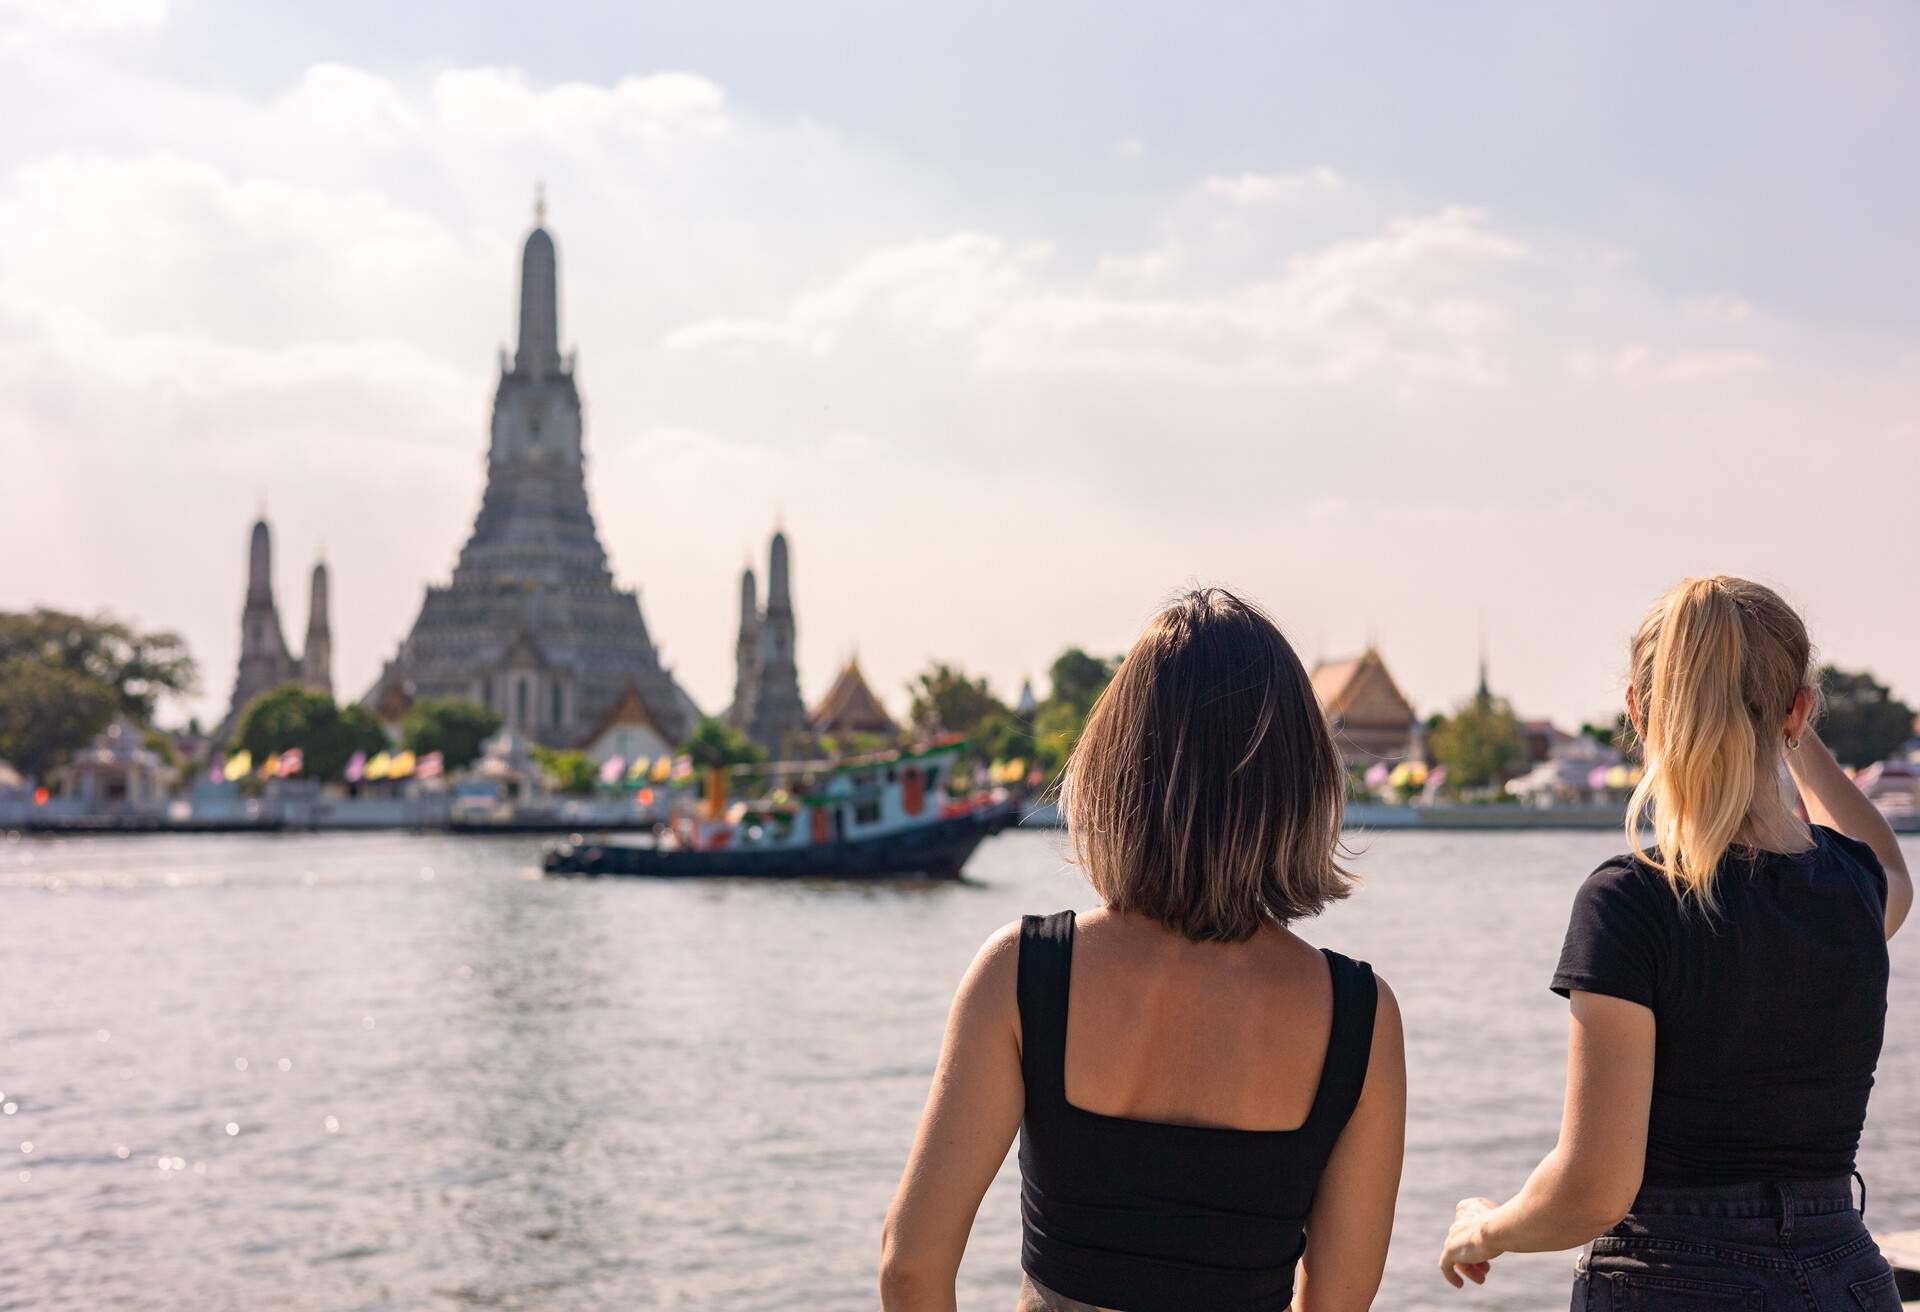 Two women gaze at the passenger boats on the river and the Wat Arun temple in the distance.